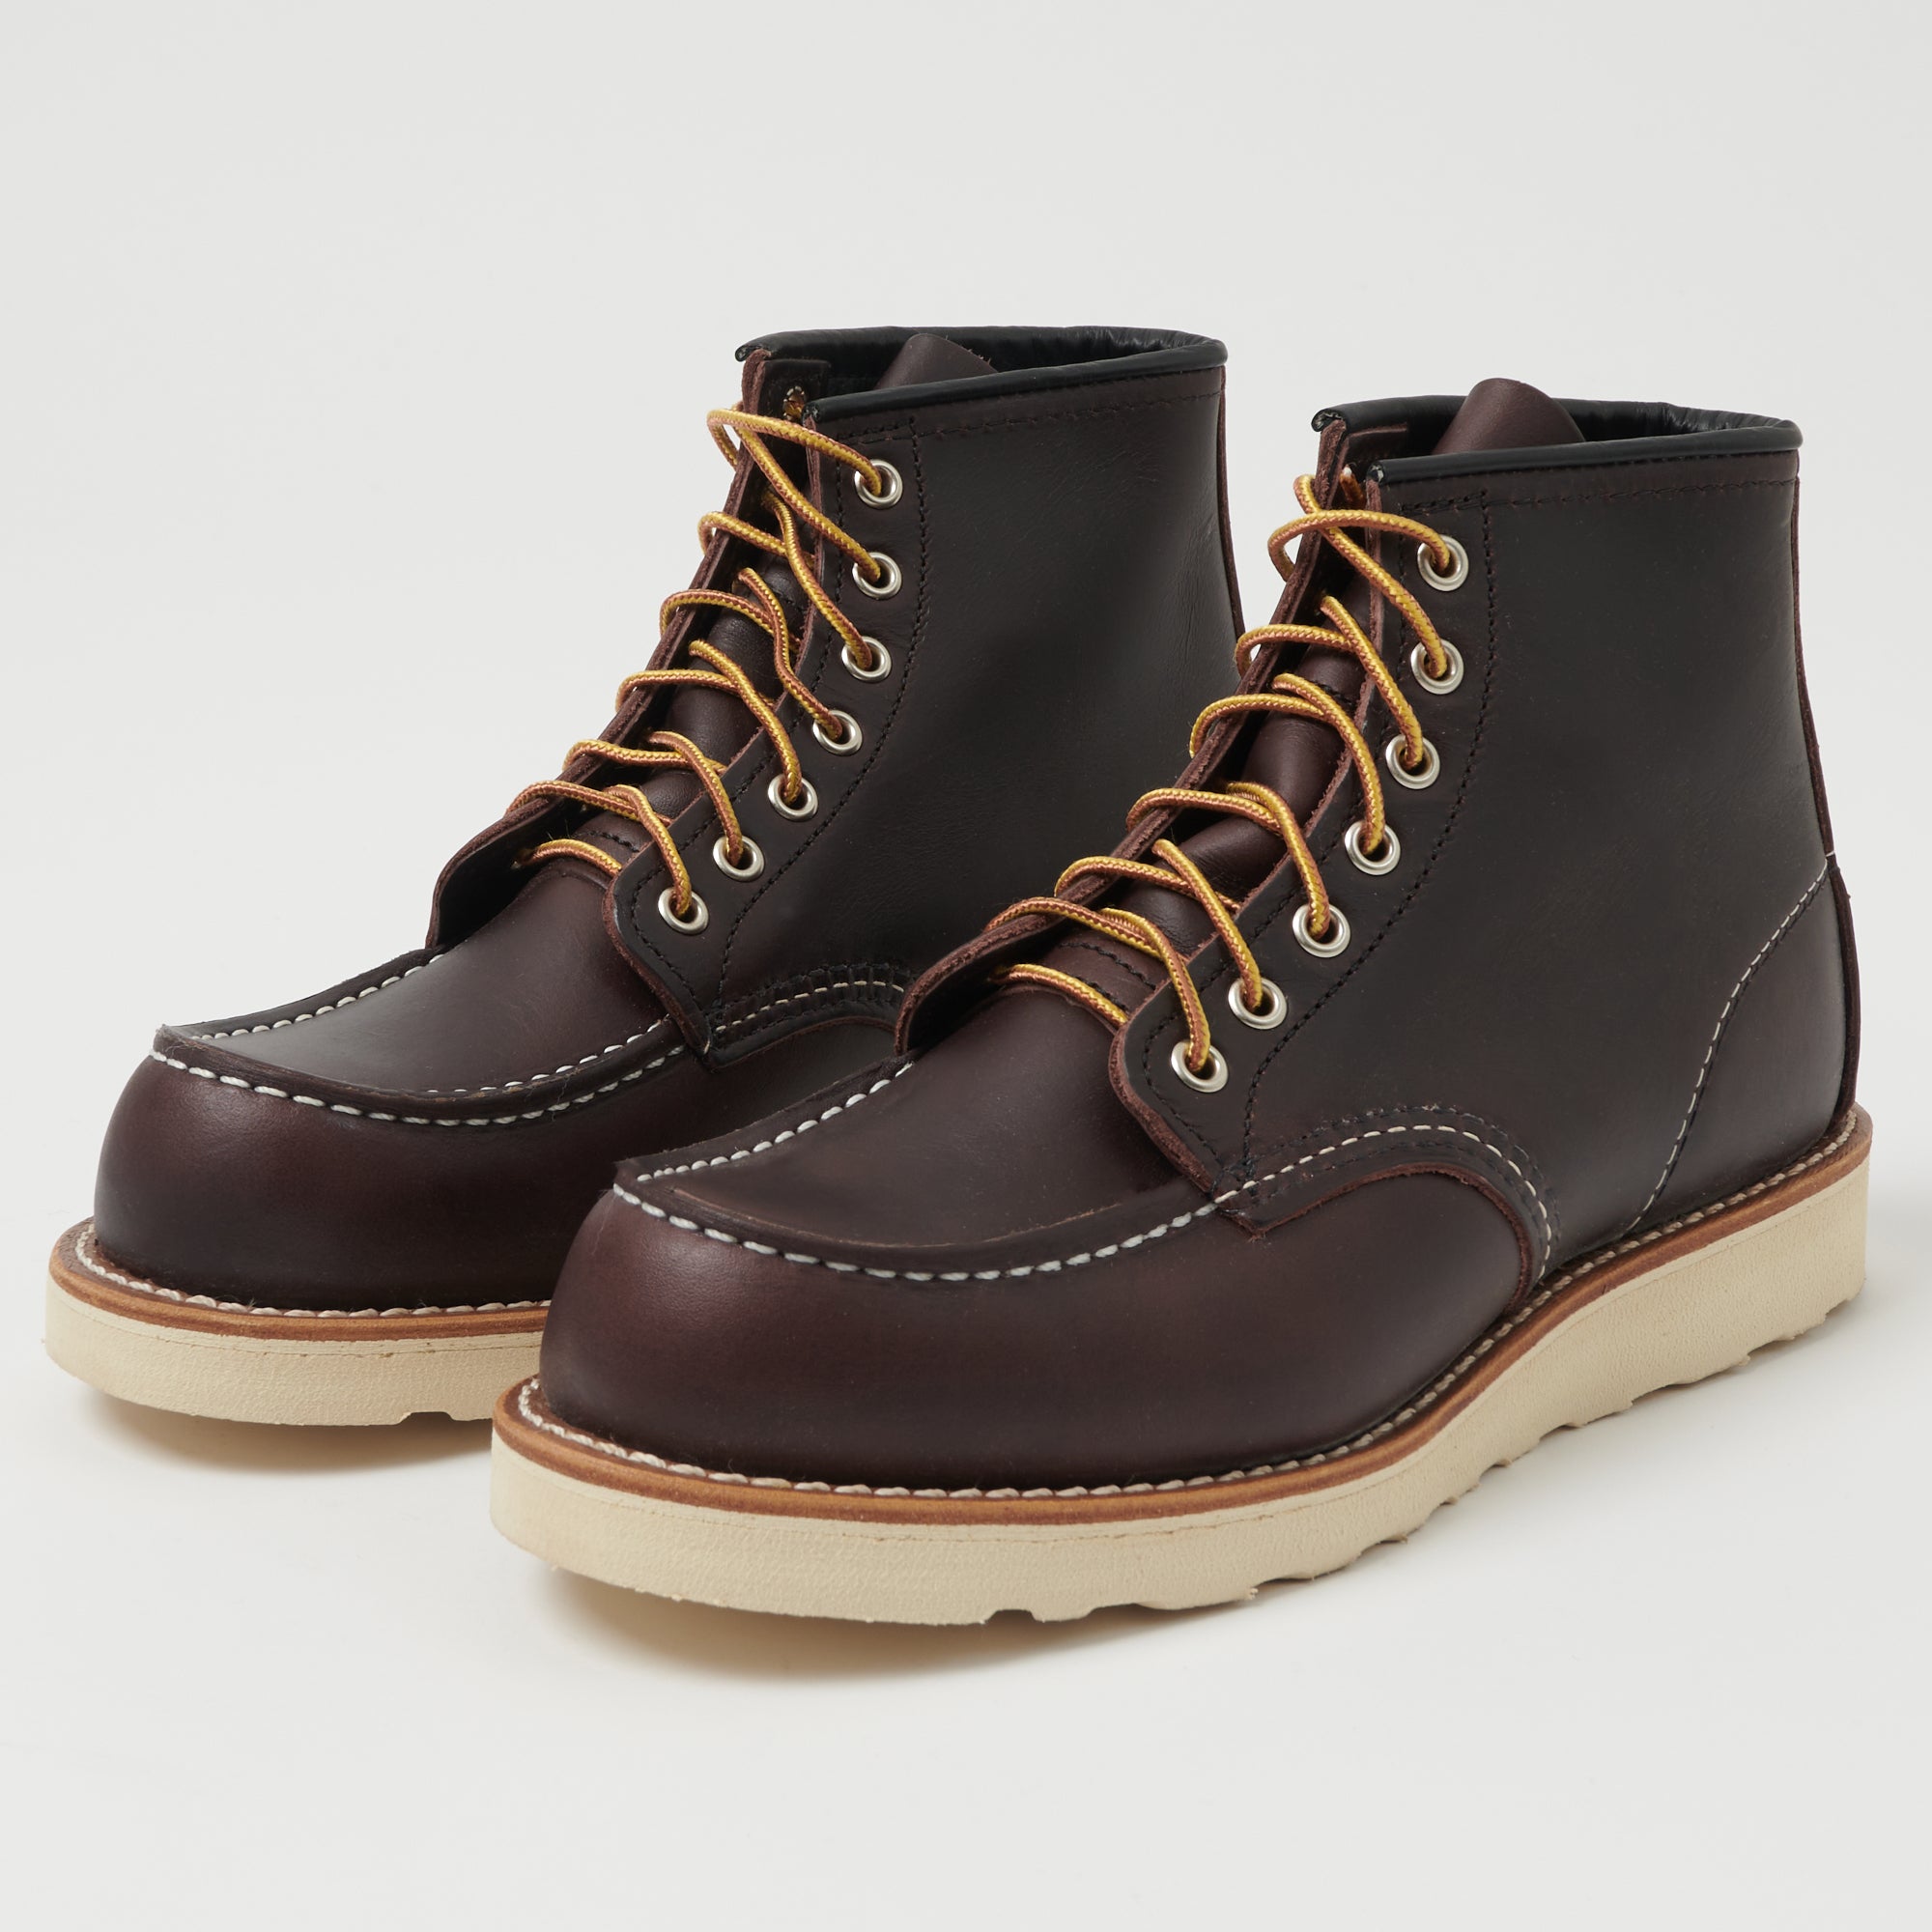 Red Wing 8847 6-Inch Moc Toe Boots - Black Cherry Excalibur | Son of a Stag